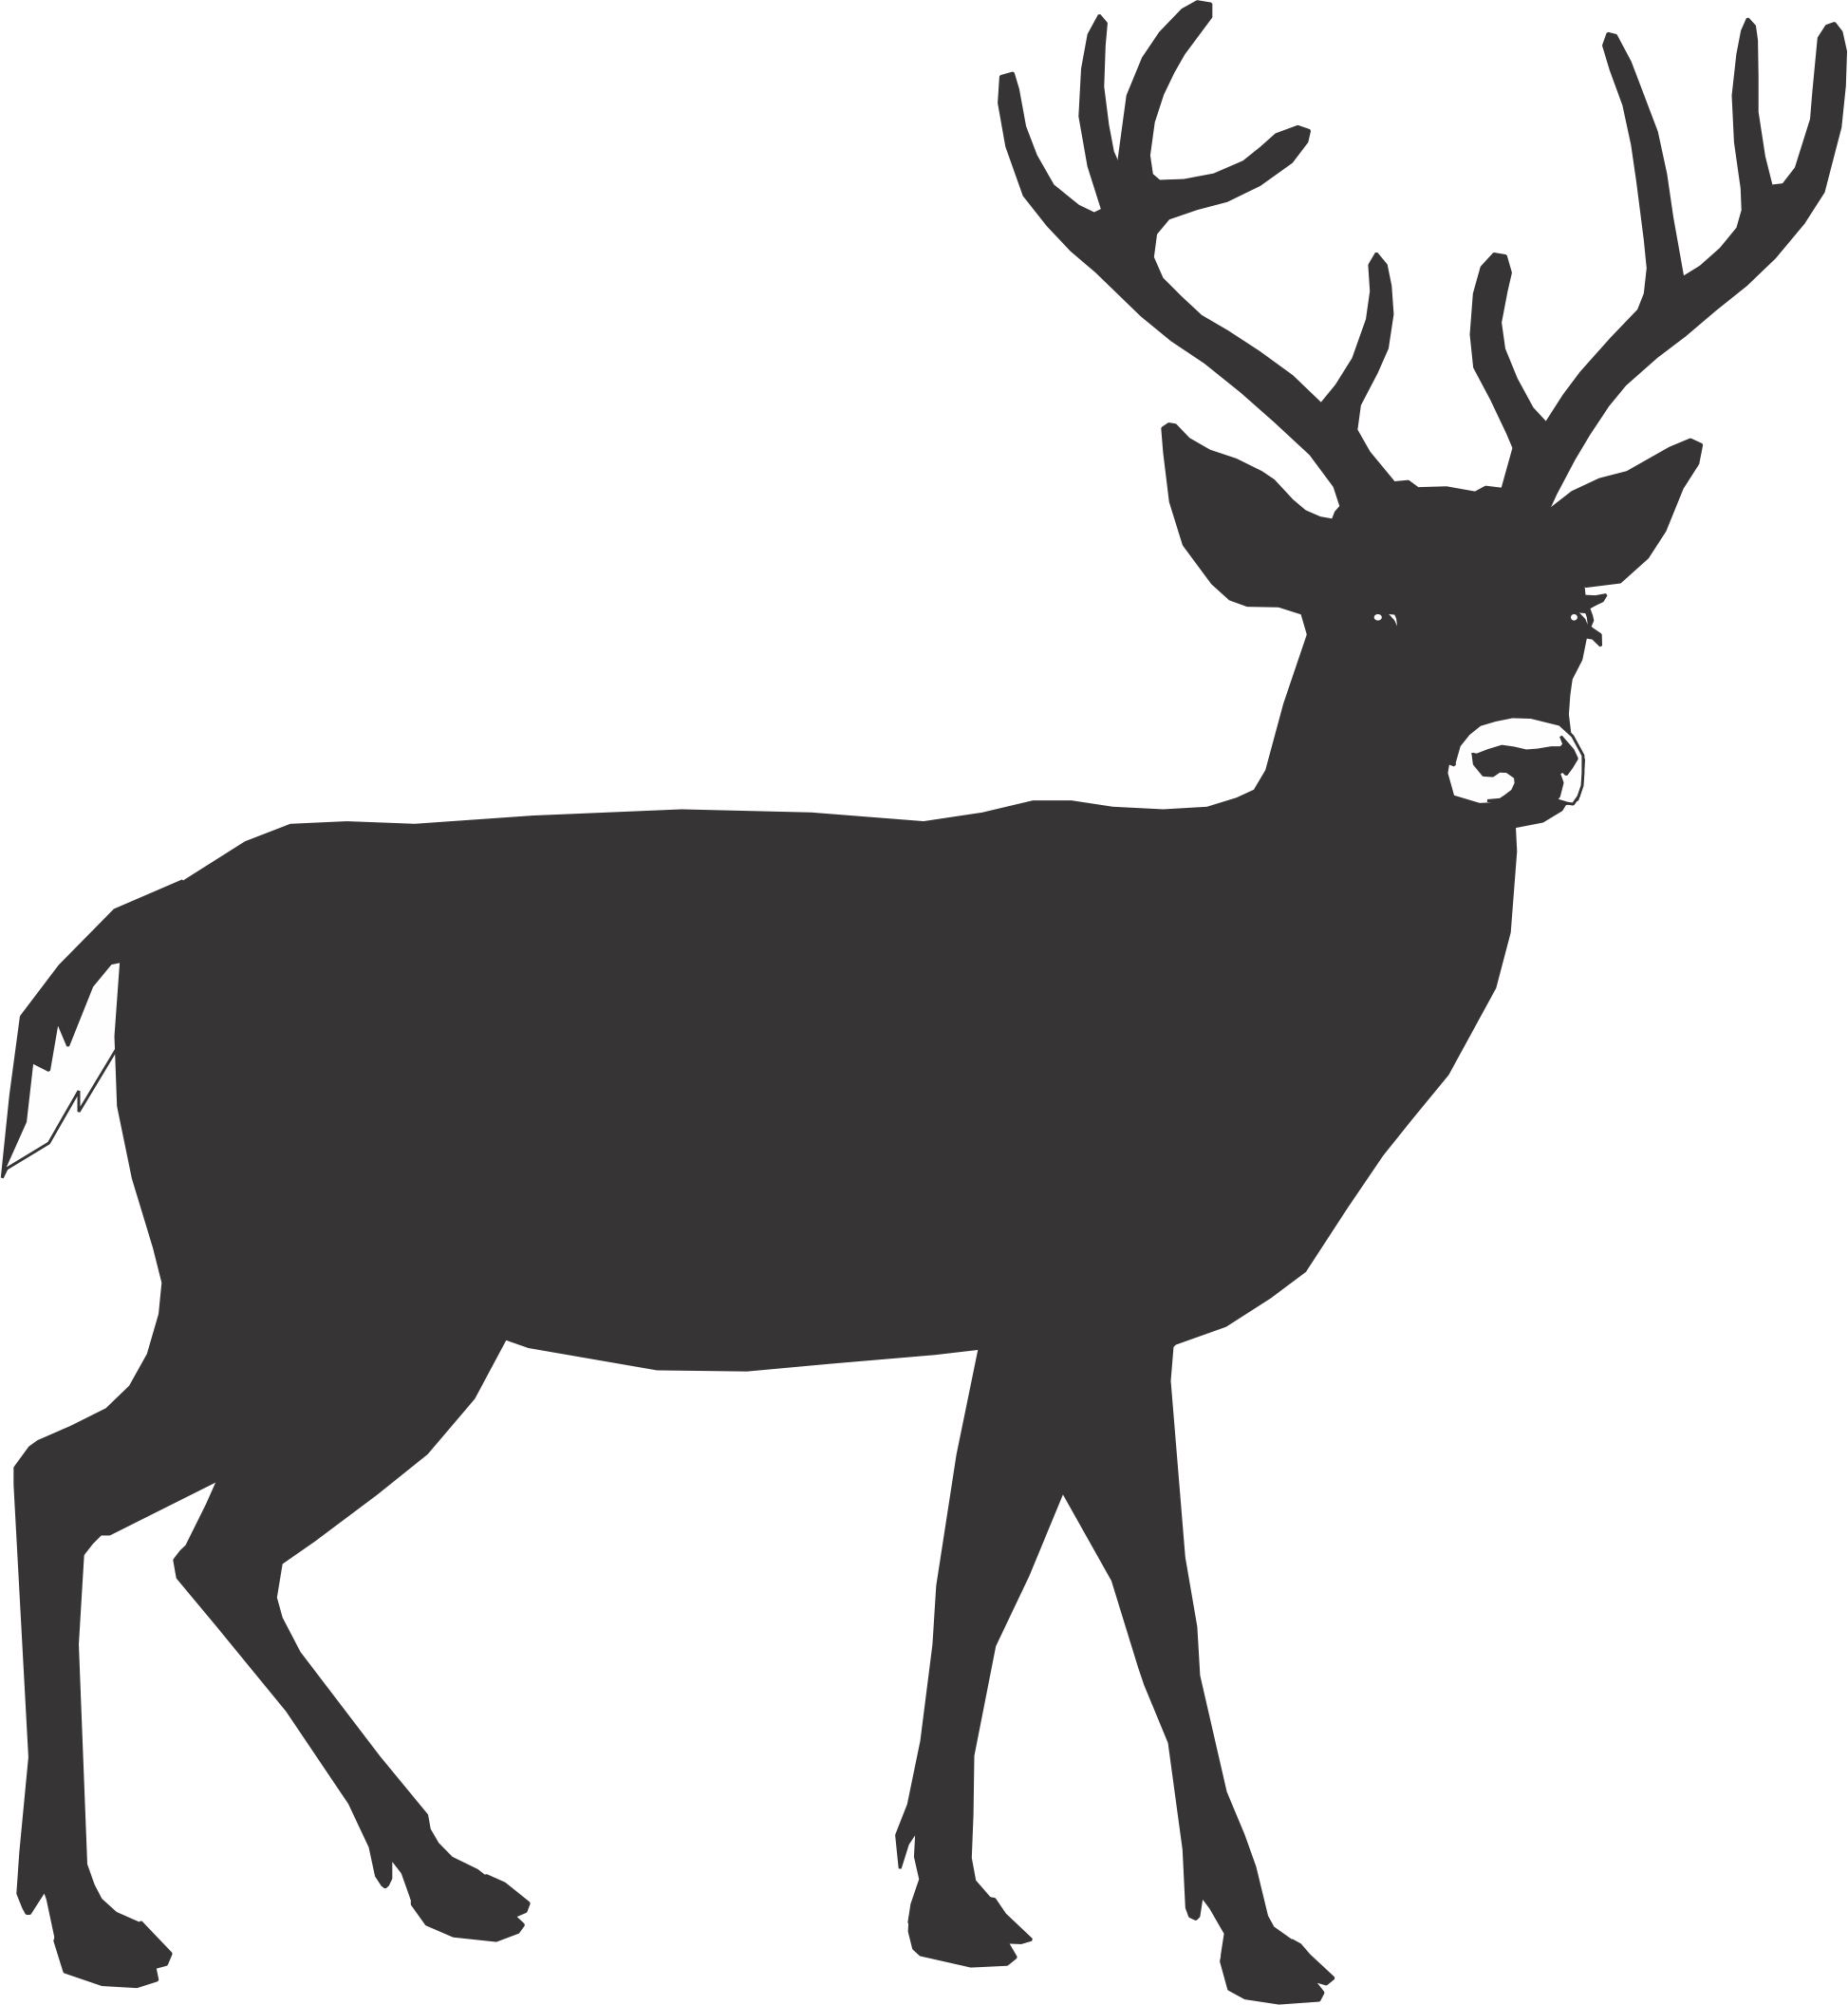 Baby Deer Silhouette - Cliparts.co